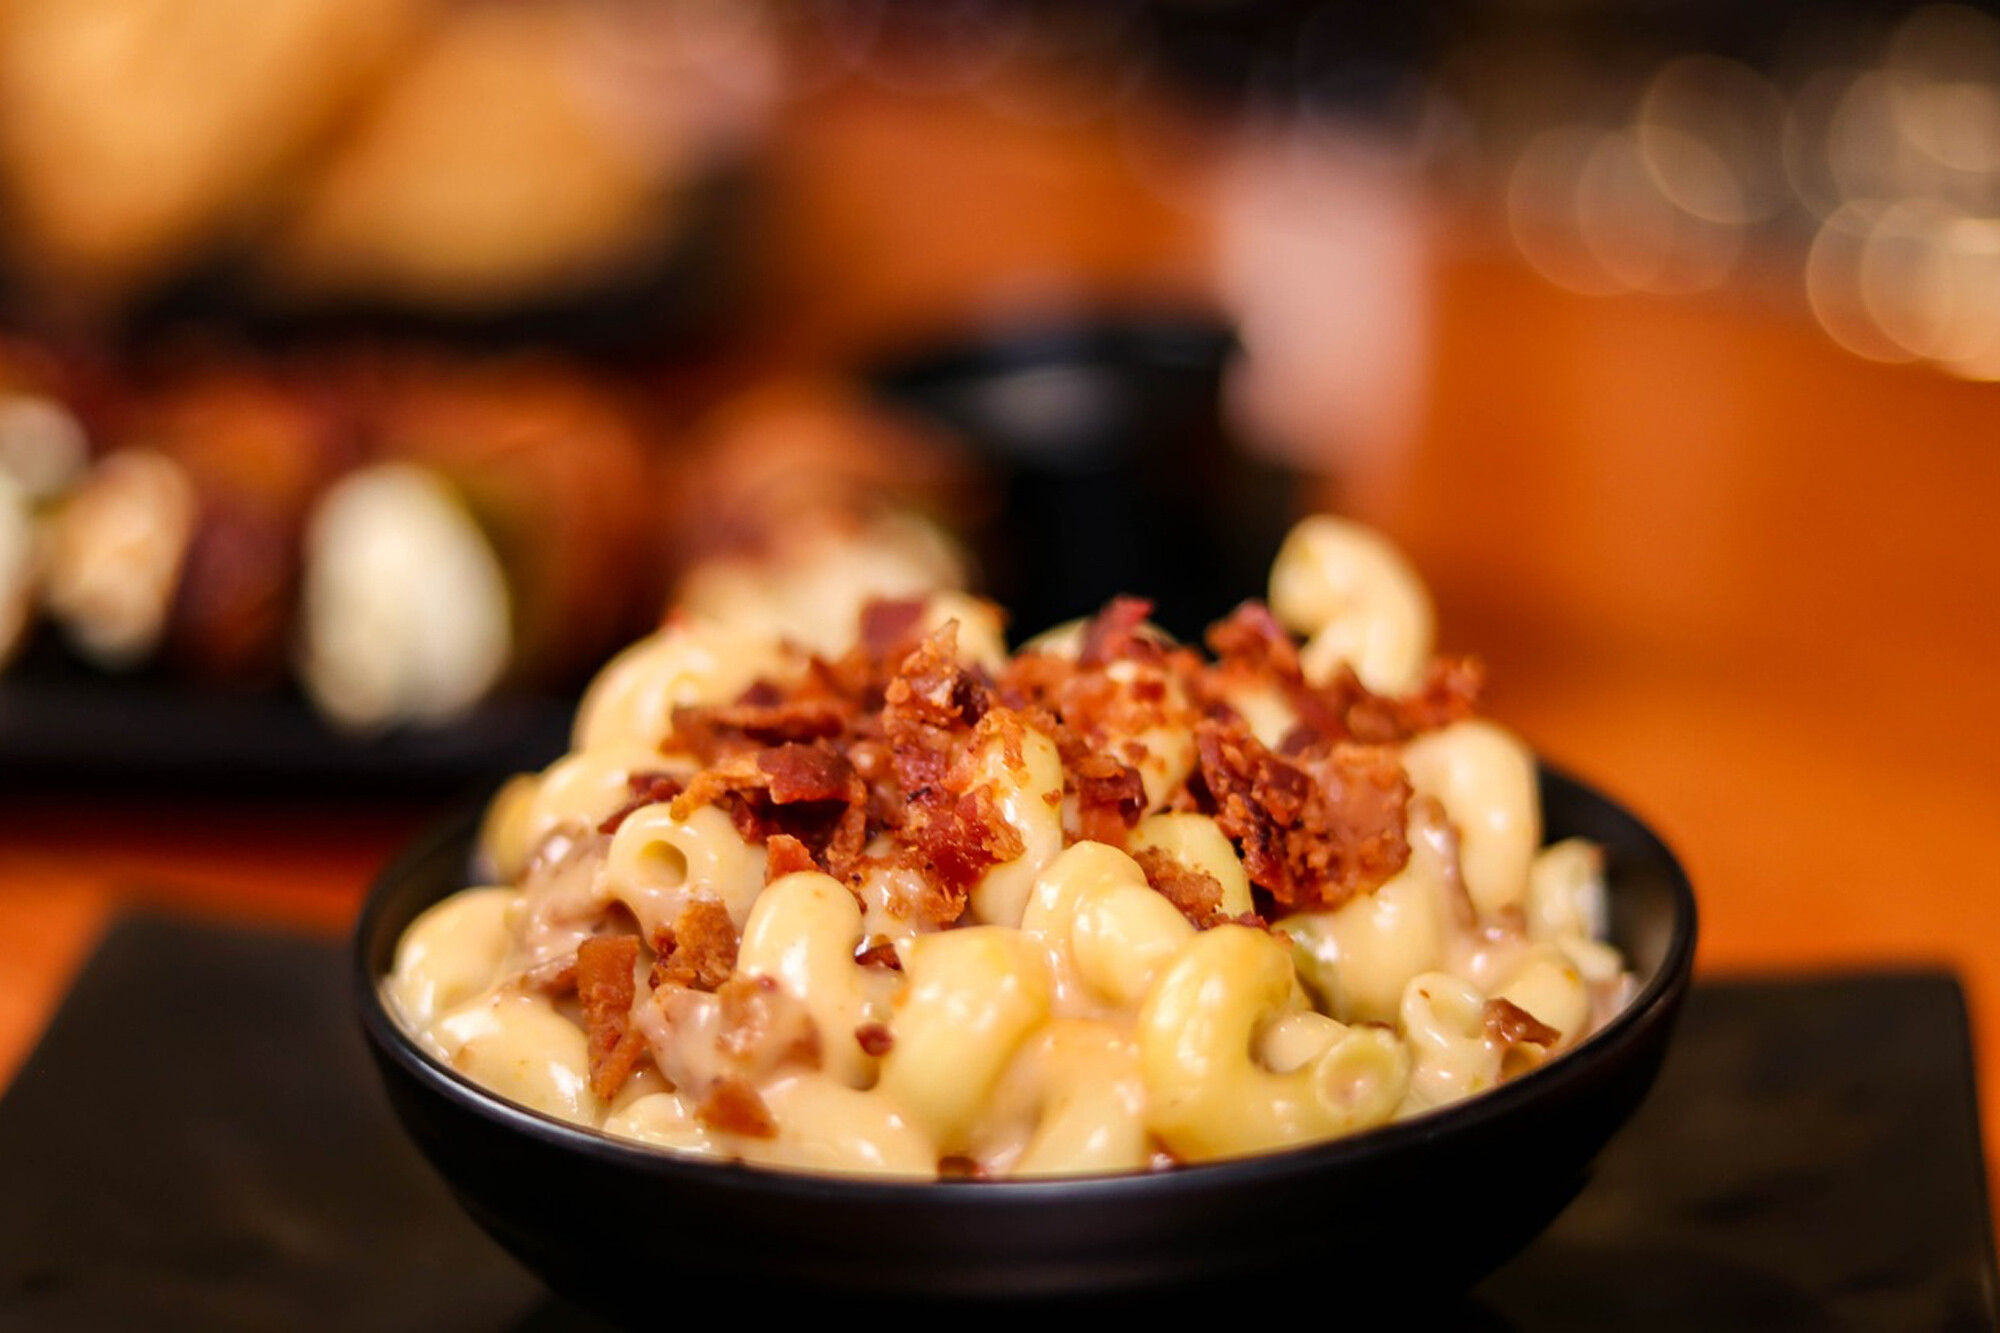 Mario S Meat Market And Deli Recipes Candied Bacon Mac And Cheese